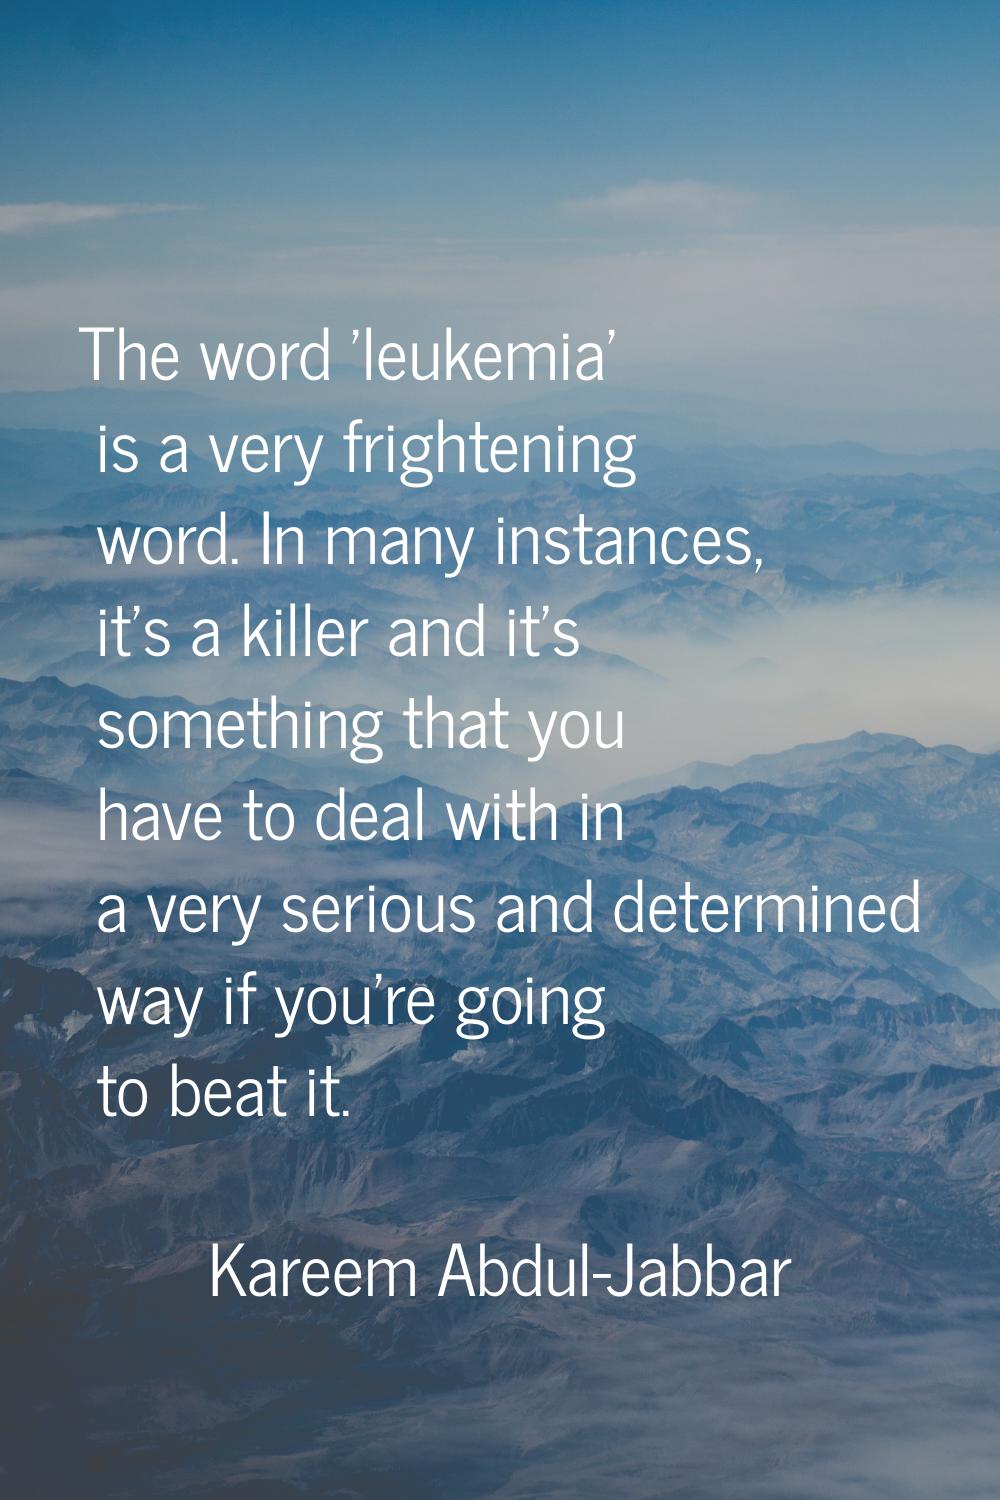 The word 'leukemia' is a very frightening word. In many instances, it's a killer and it's something